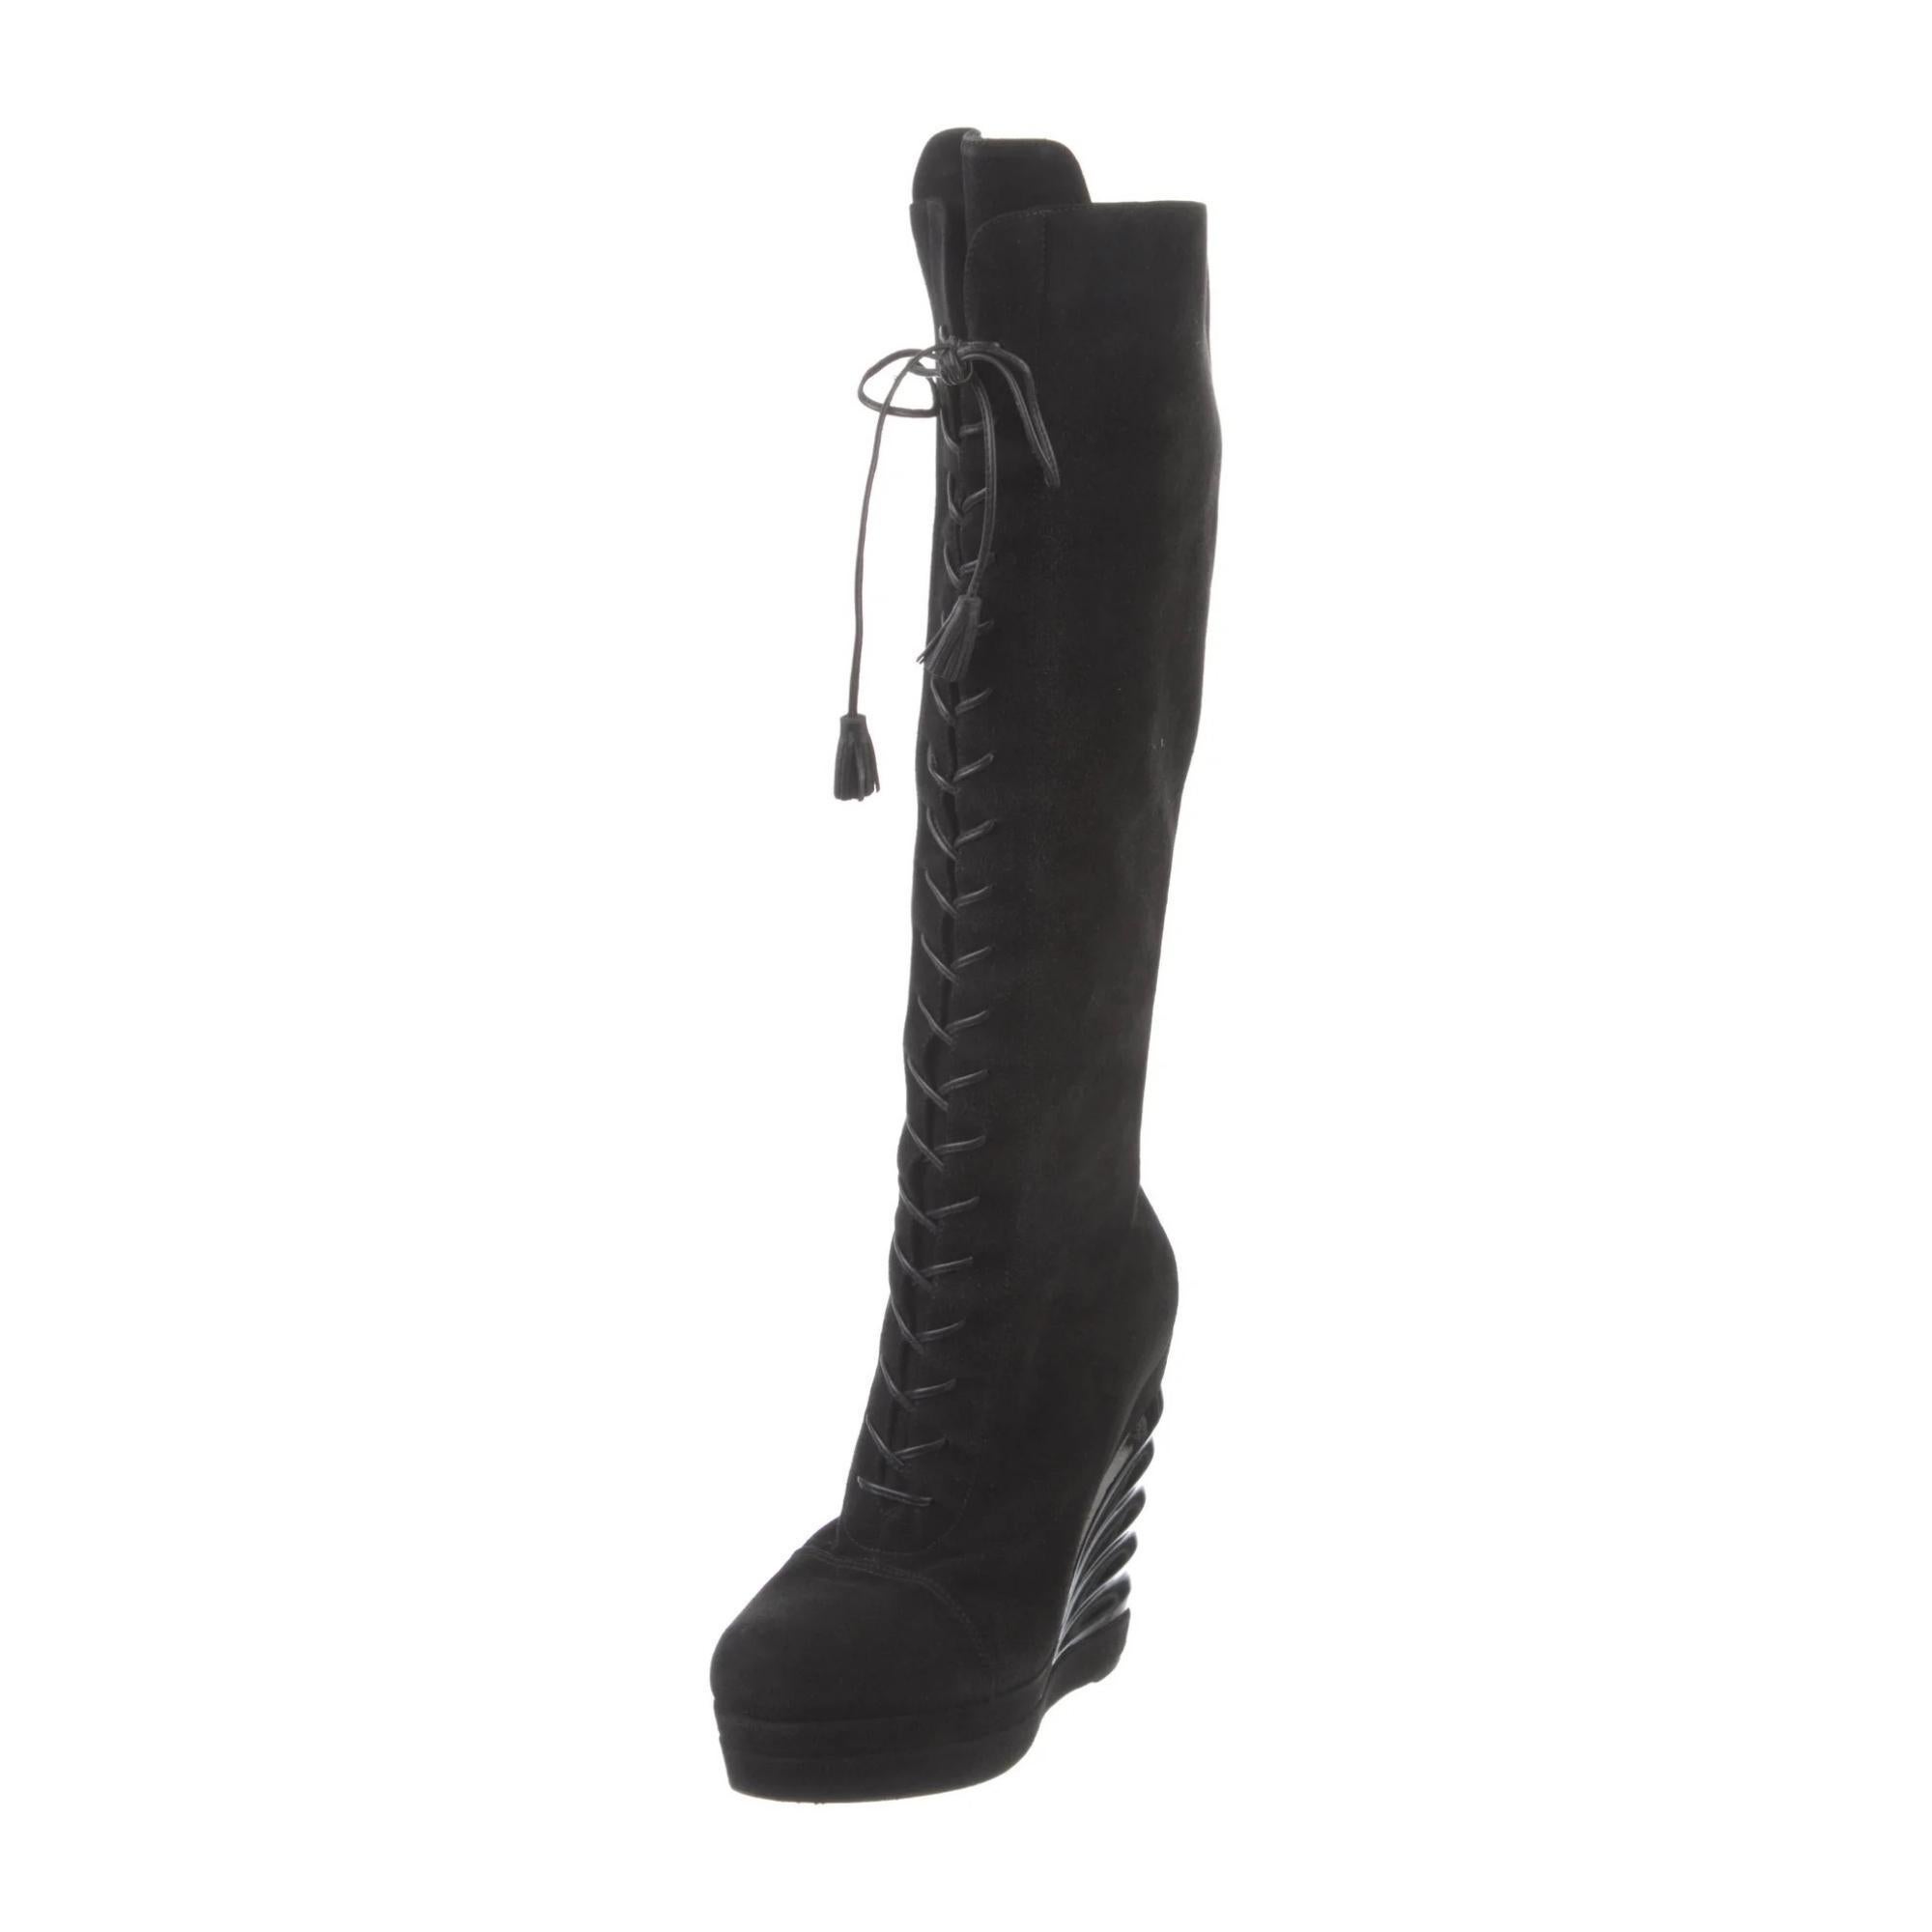 Yves Saint Laurent Suede Mid-Calf Lace-Up Boots. Black. Leather Trim. Leather & Tassel Accents. Semi-Pointed Toes. Wedge Heels with Platform. Lace-Up Closure at Uppers & Concealed Zip Closure at Ankles.

COLOR: Black
MATERIAL: Suede
ITEM CODE: